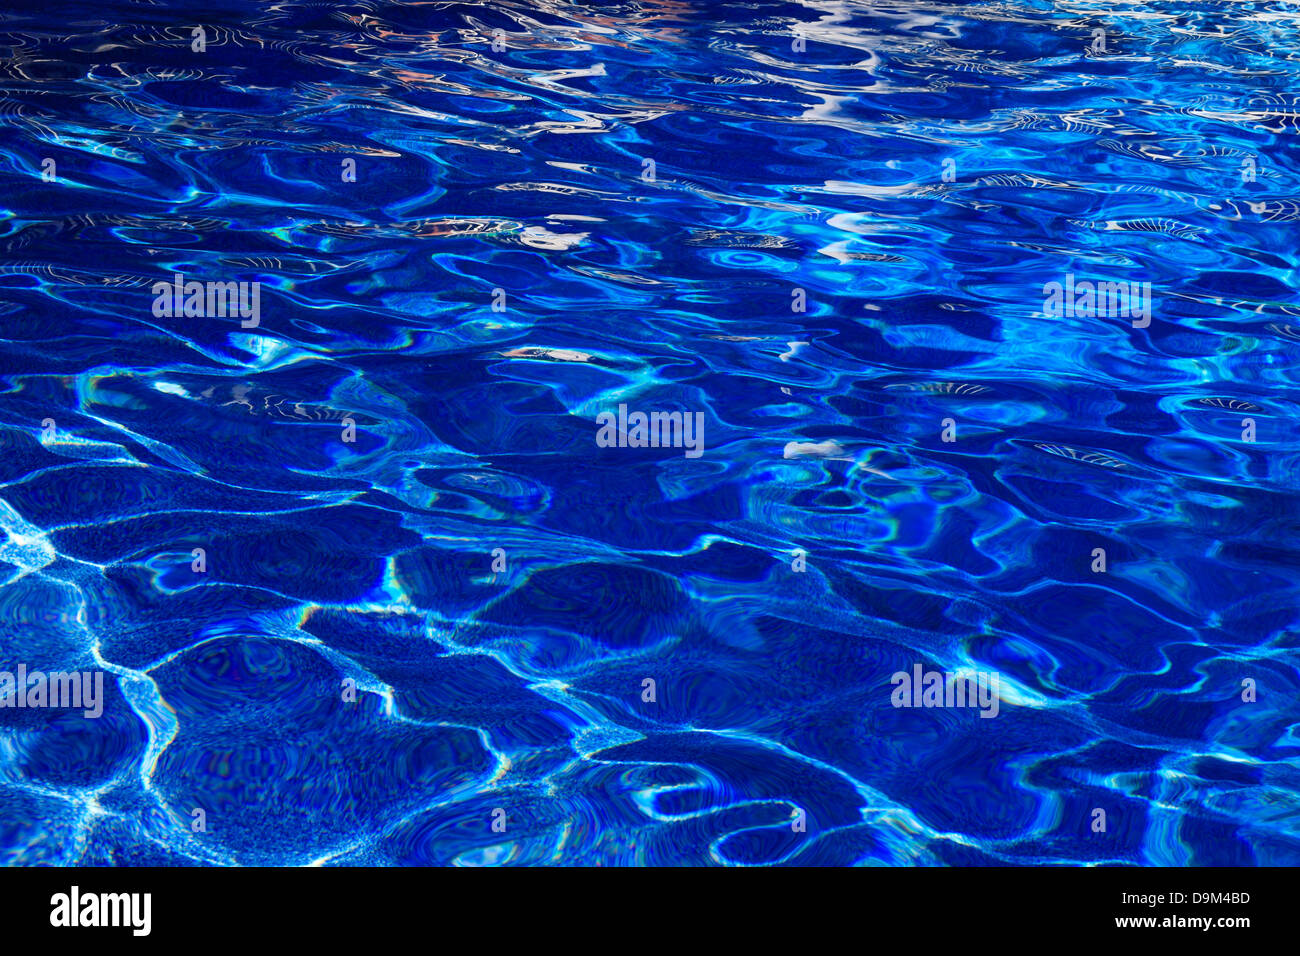 Abstract Patterns Created By Sunlight On The Undulating Surface Of Deep Blue Swimming Pool Water Stock Photo